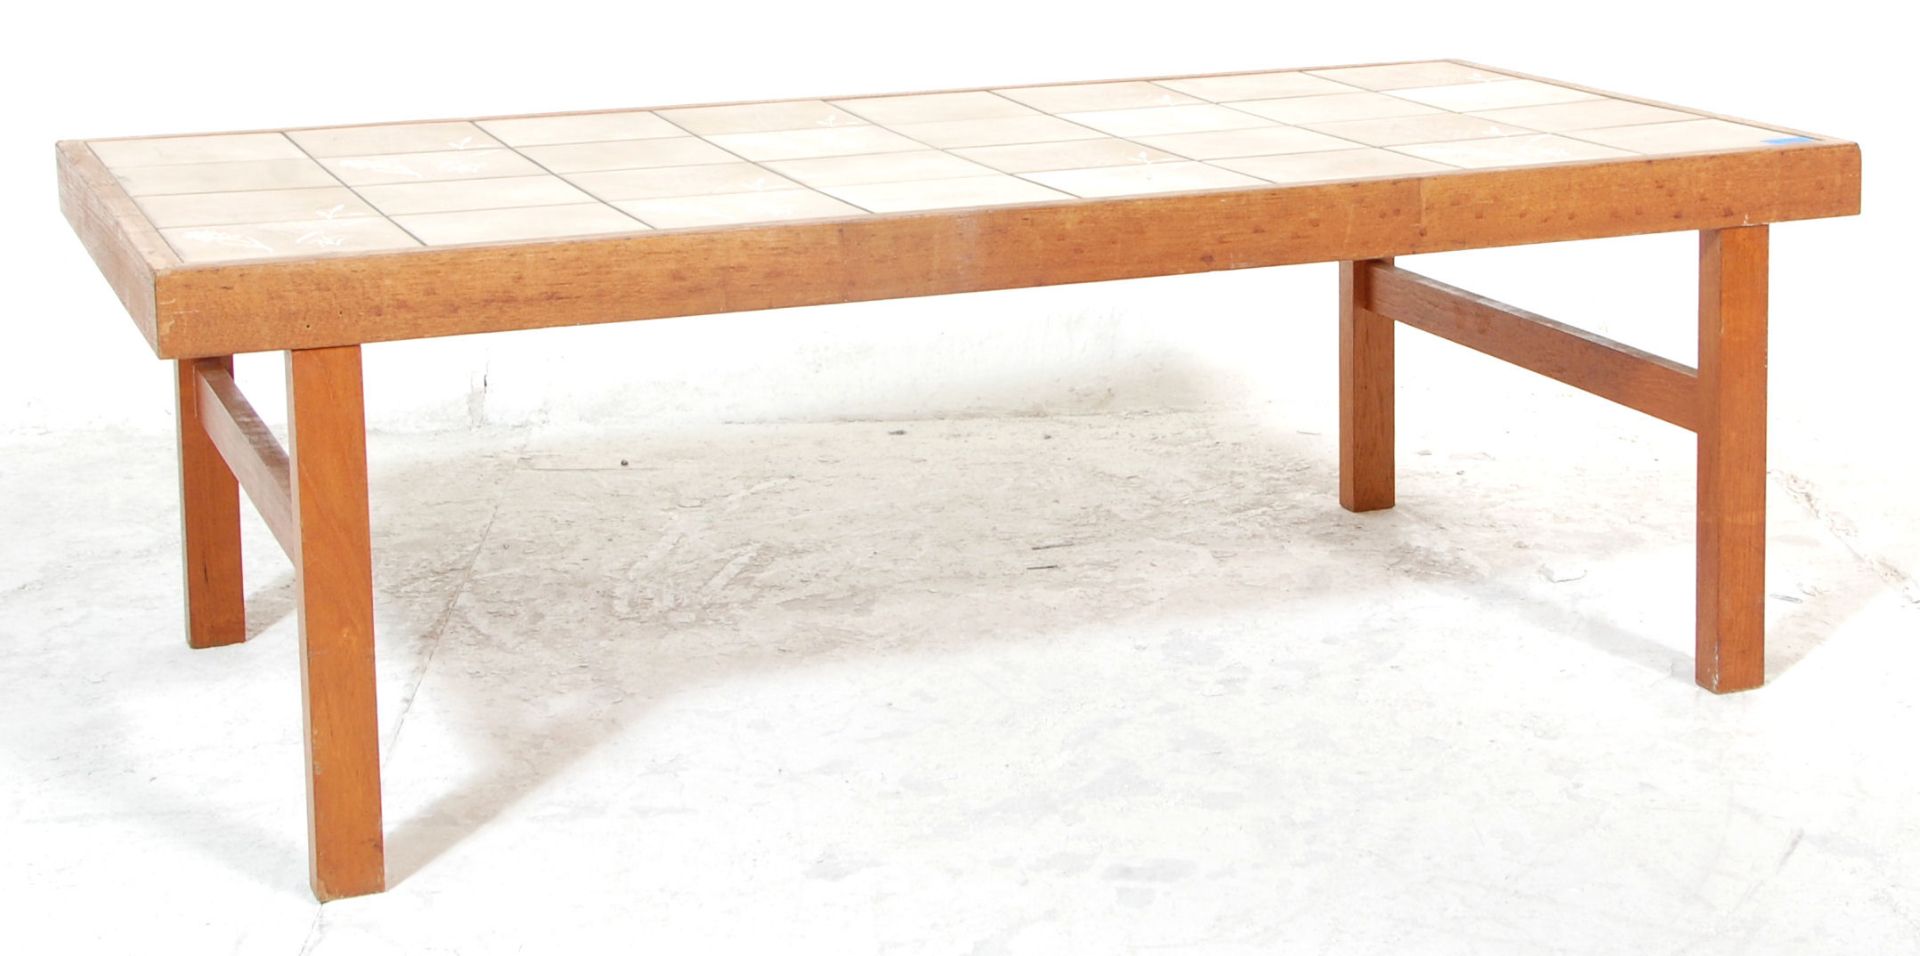 Trioh - A retro vintage 1960's Danish teak wood and tile top coffee - occasional table by Trioh of